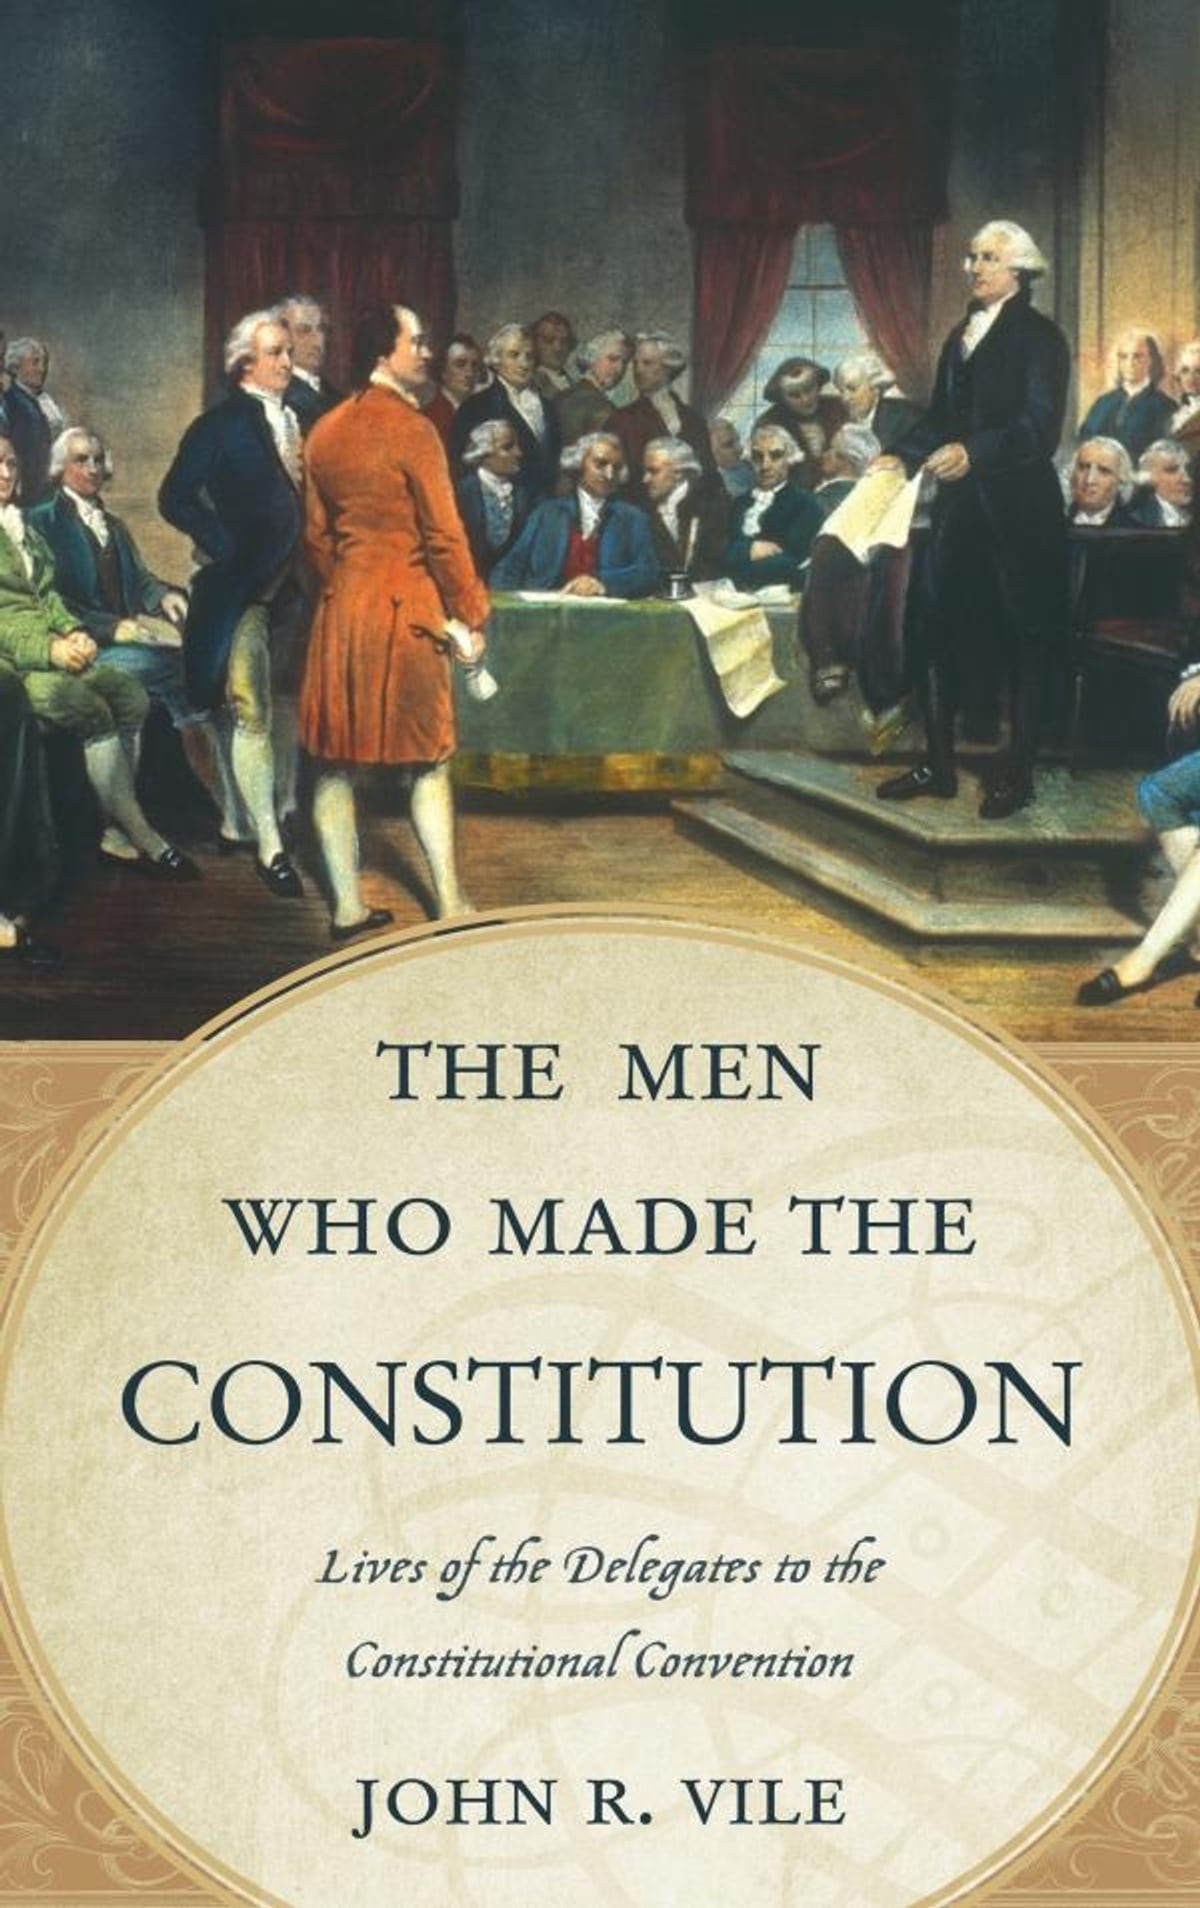 The Constitutional Convention of 1787: A Comprehensive Encyclopedia of America's Founding